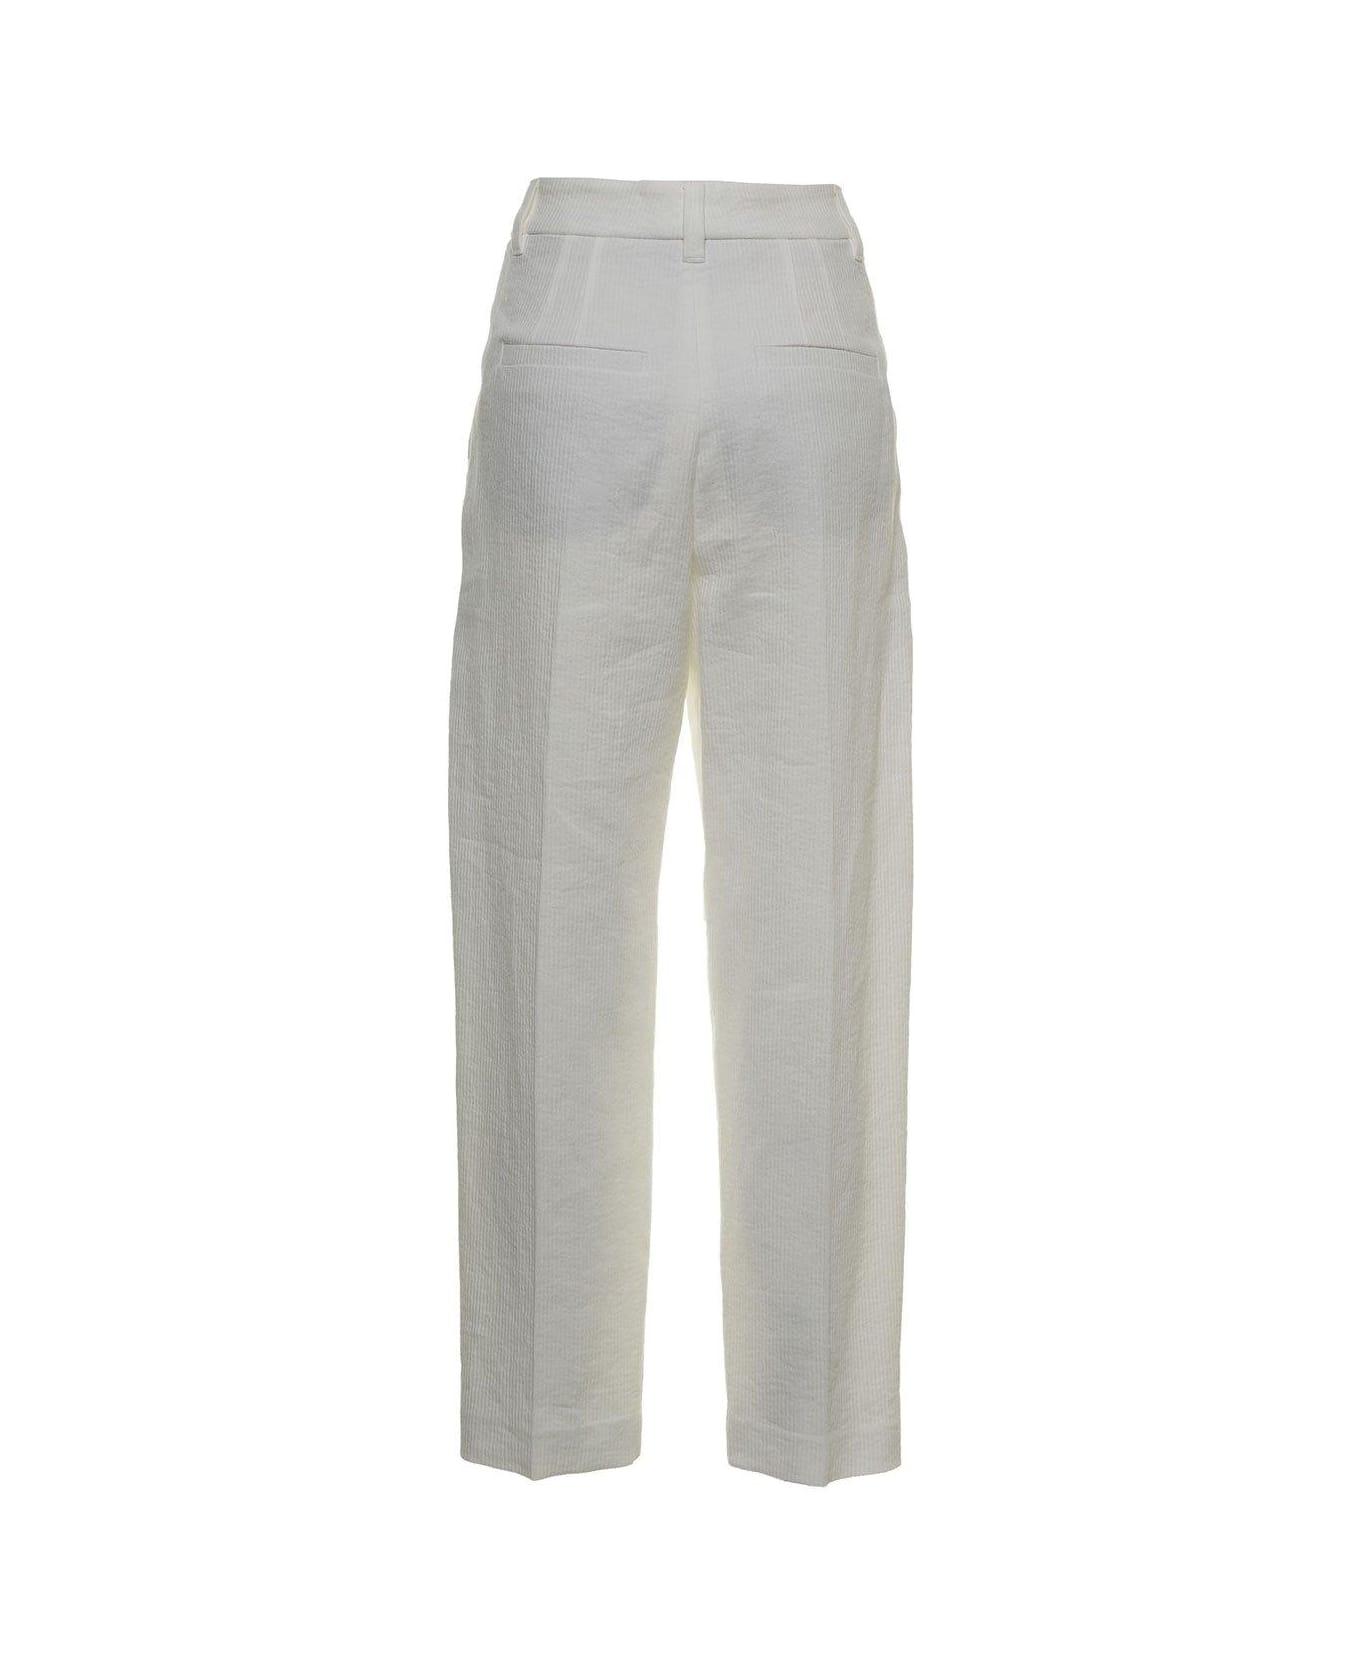 Brunello Cucinelli Pleat Detailed Tapered Pants - White ボトムス